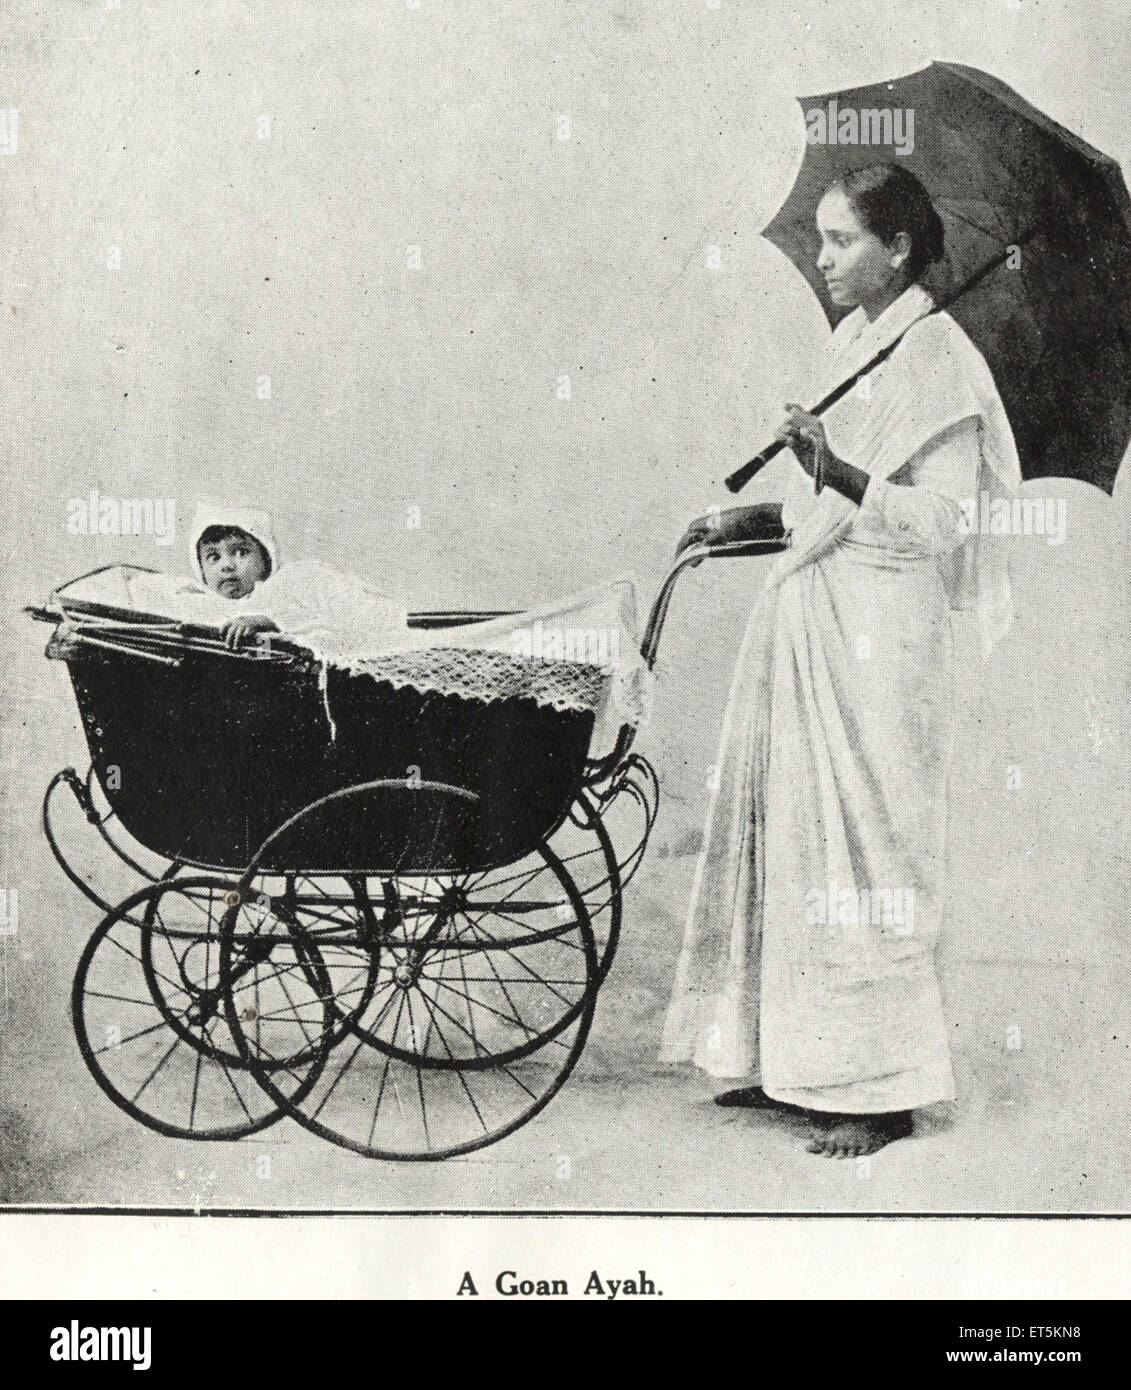 baby in pram, baby stroller, Catholic Community, aya with umbrella, India, Asia, old vintage 1800s picture Stock Photo